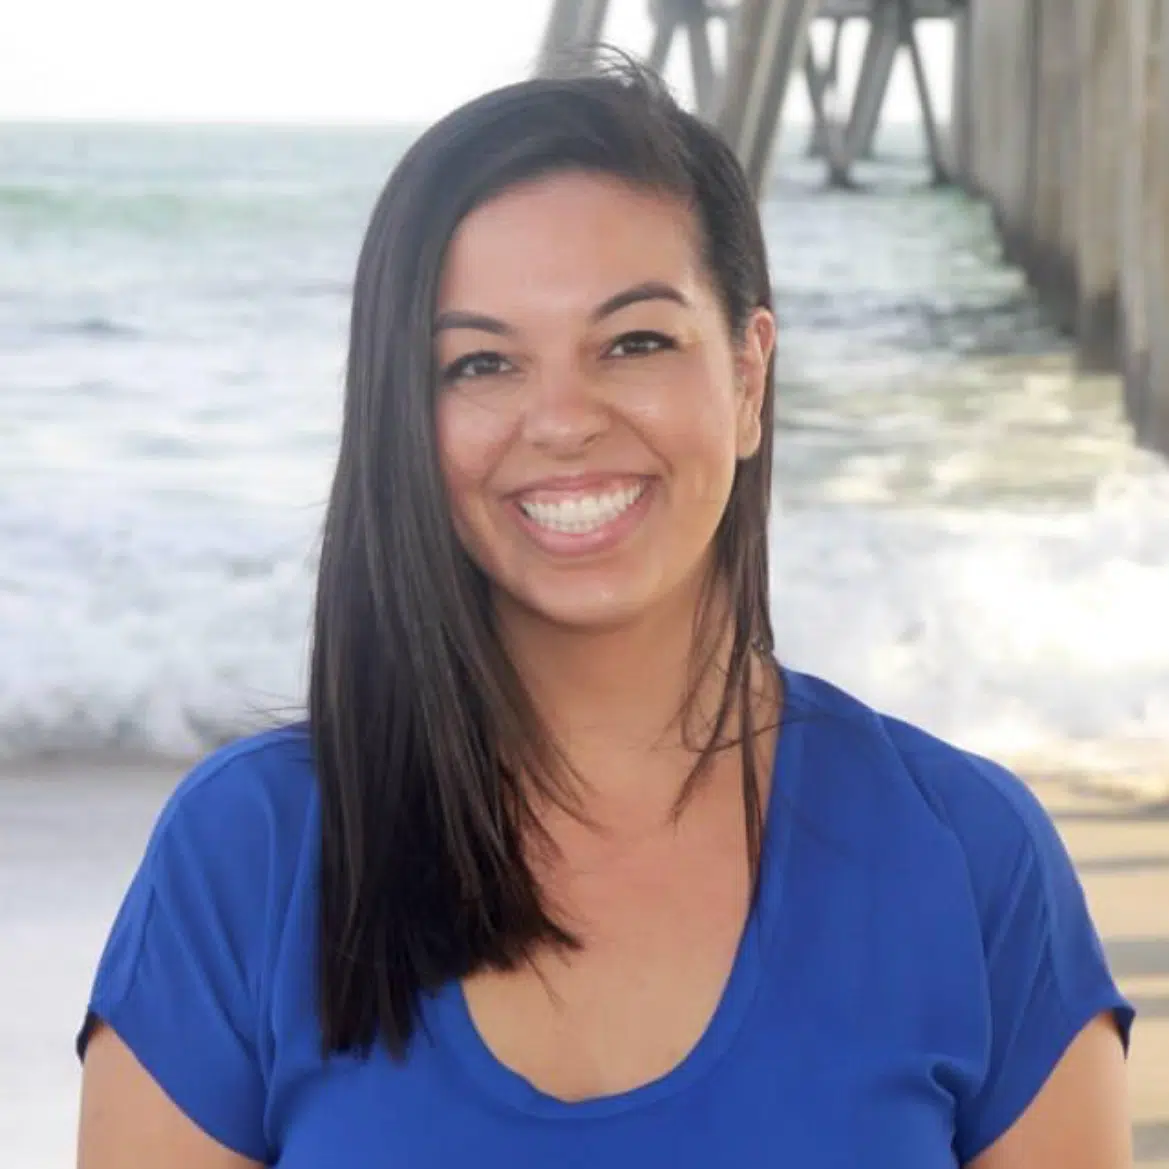 A woman smiling in front of a pier.